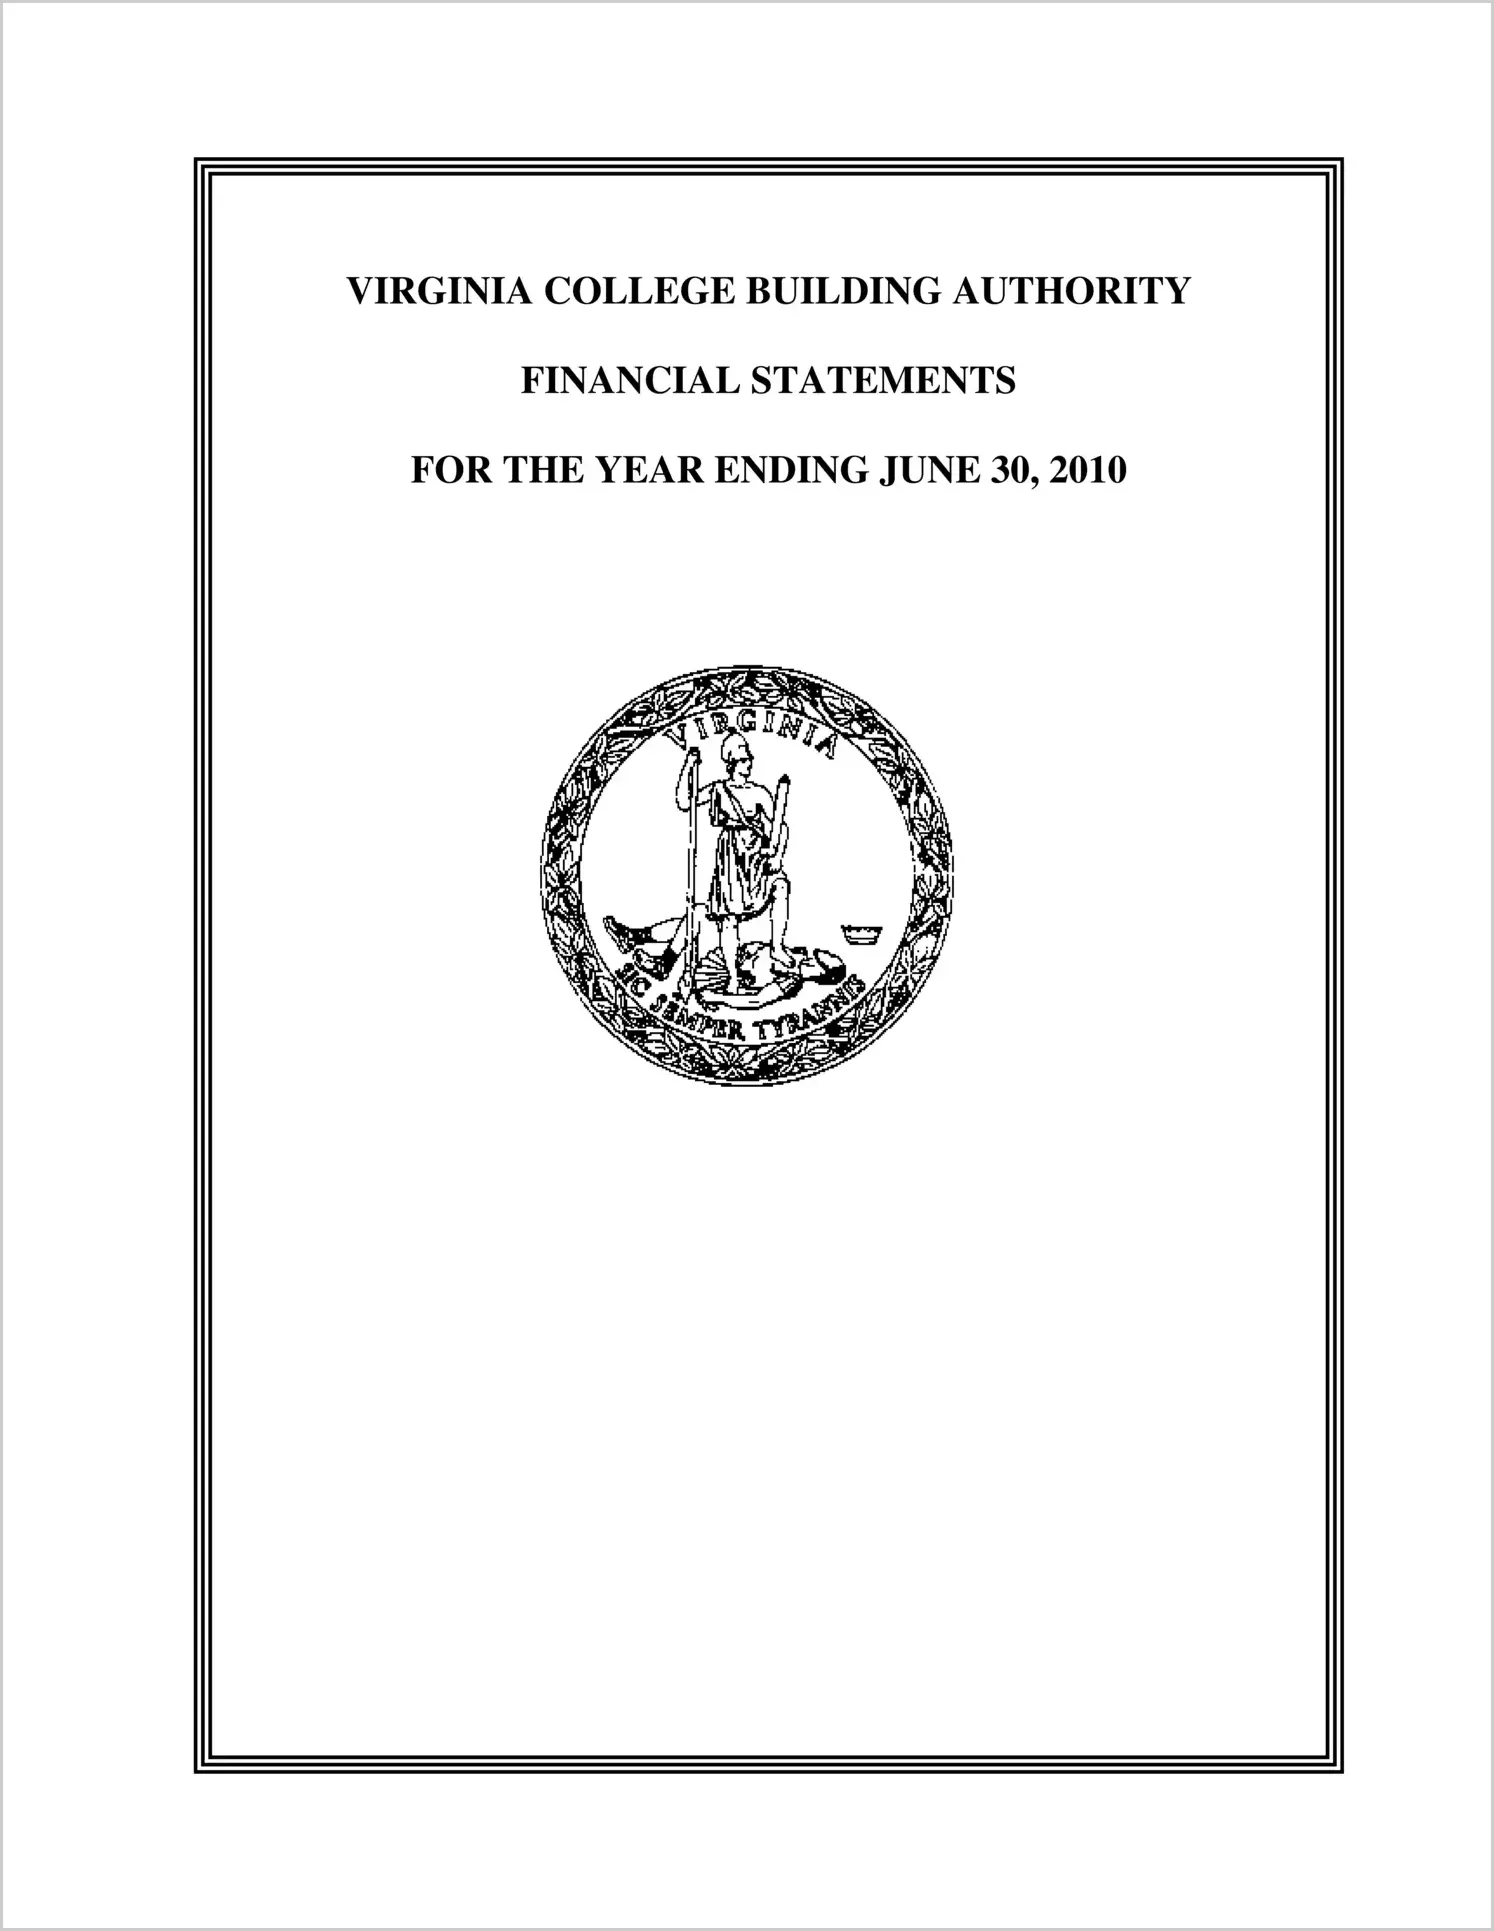 Virginia College Building Authority for the year ended June 30, 2010